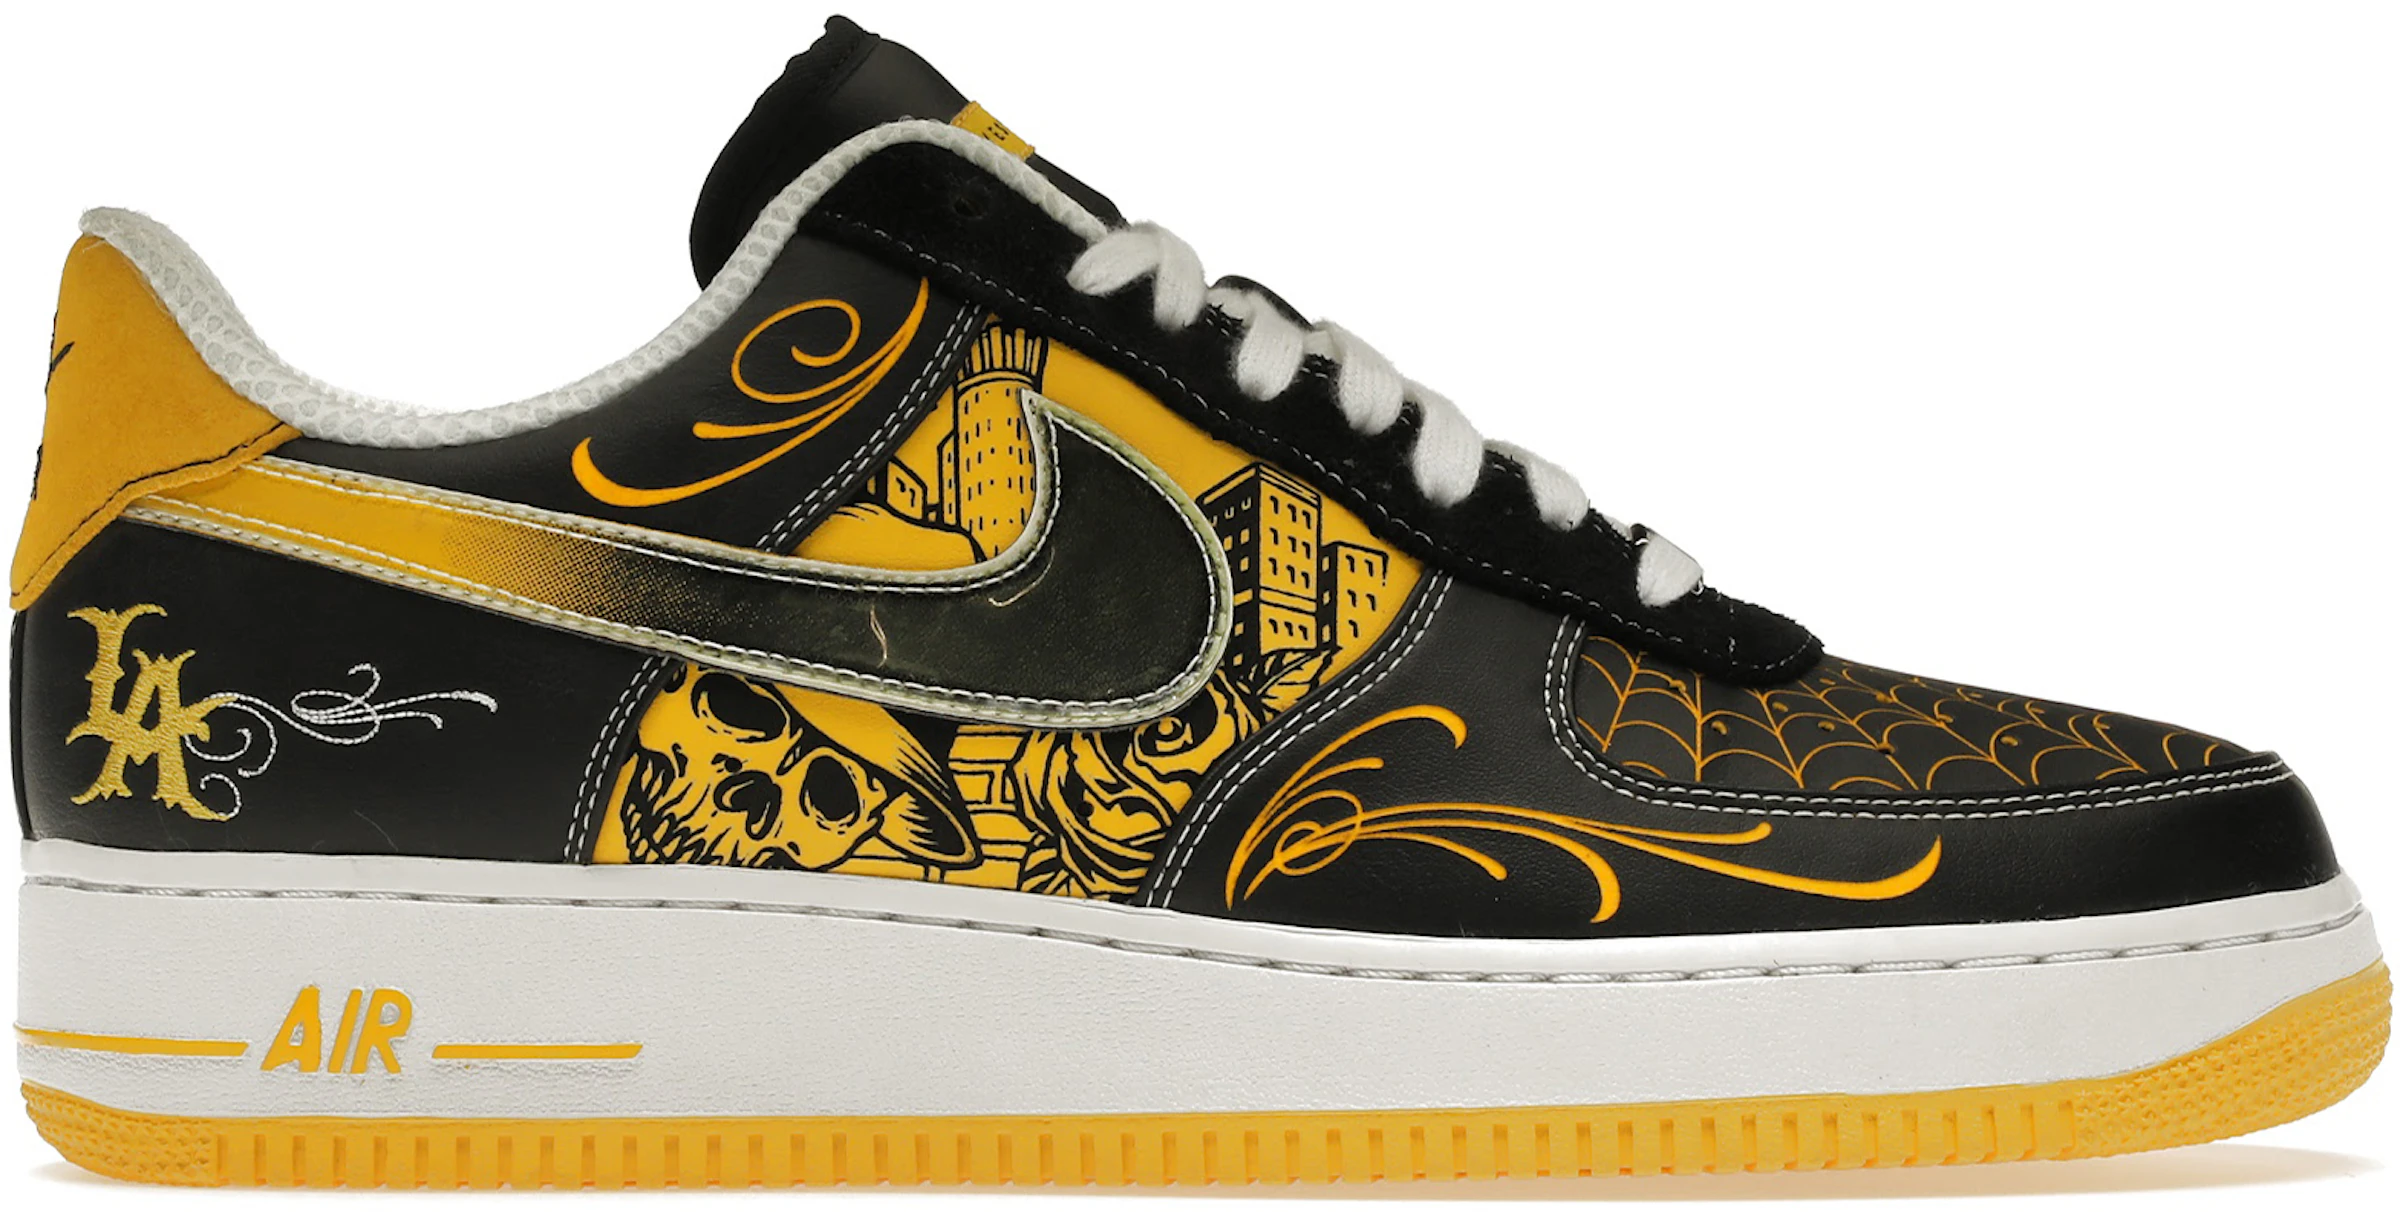 Air Force 1 Low Livestrong - 378126-071 - ES